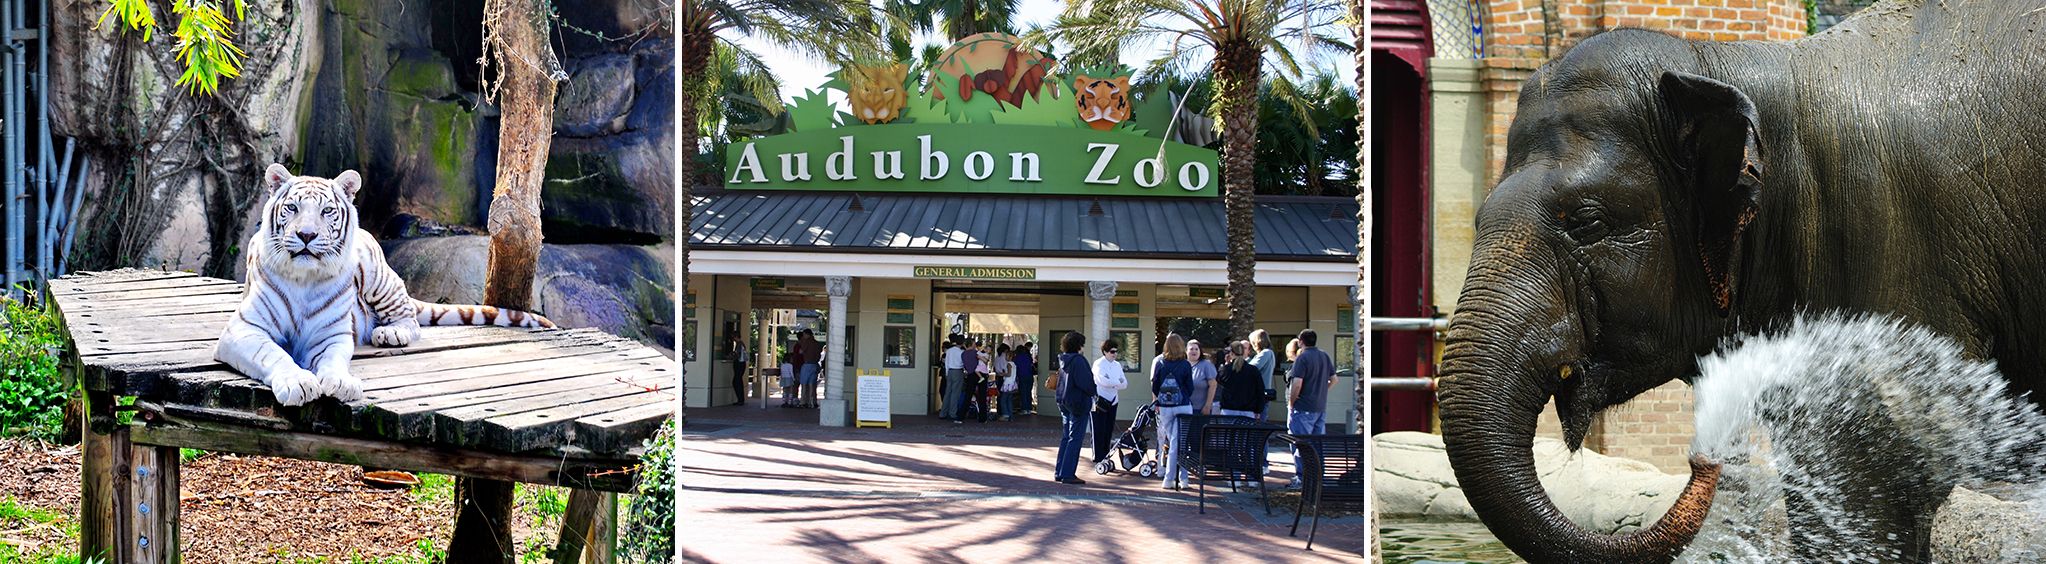 Audubon Zoo in New Orleans